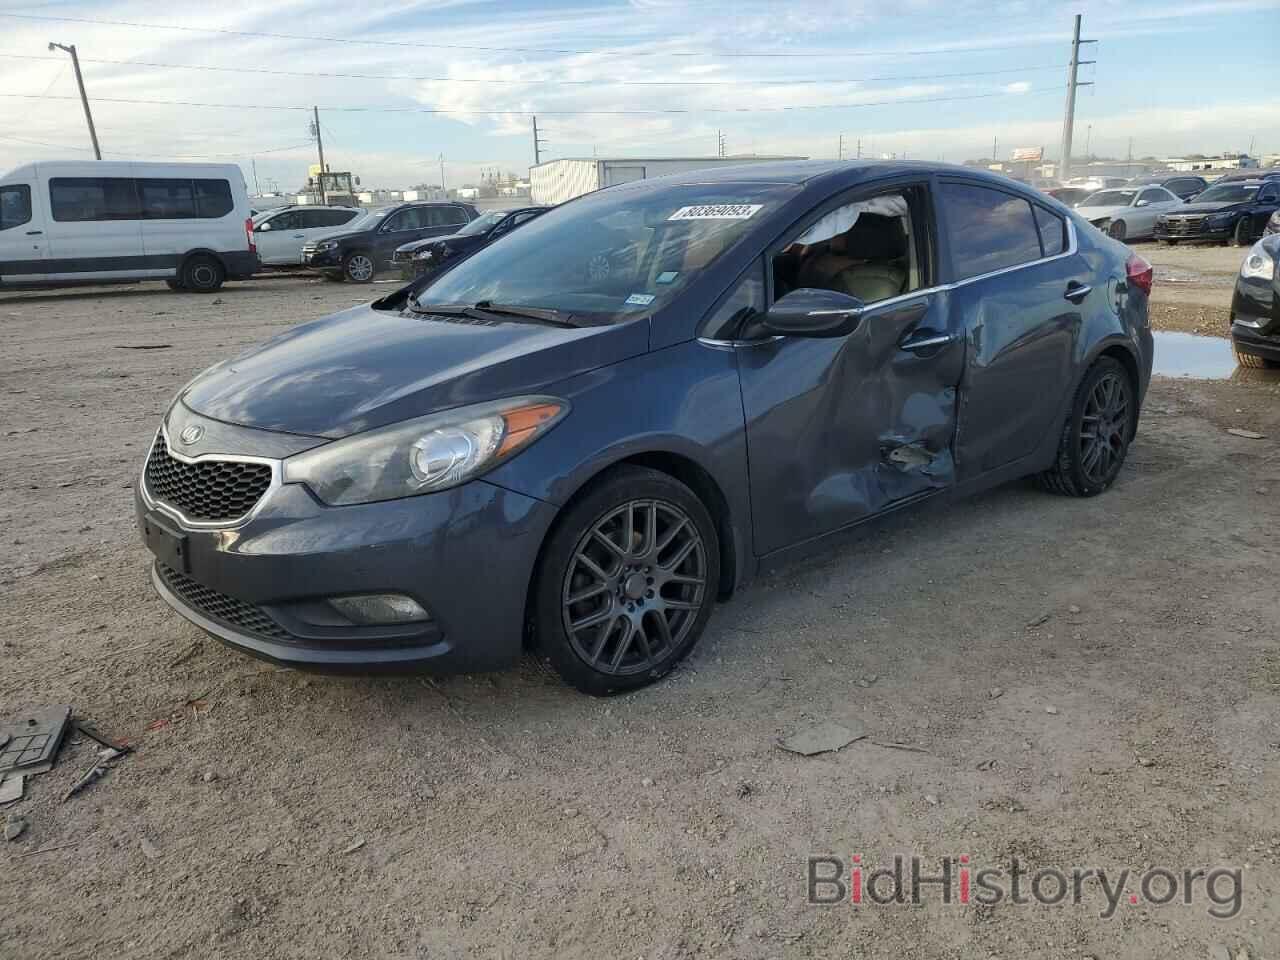 Report KNAFZ4A85G5547576 KIA FORTE 2016 BLUE GAS - price and damage history